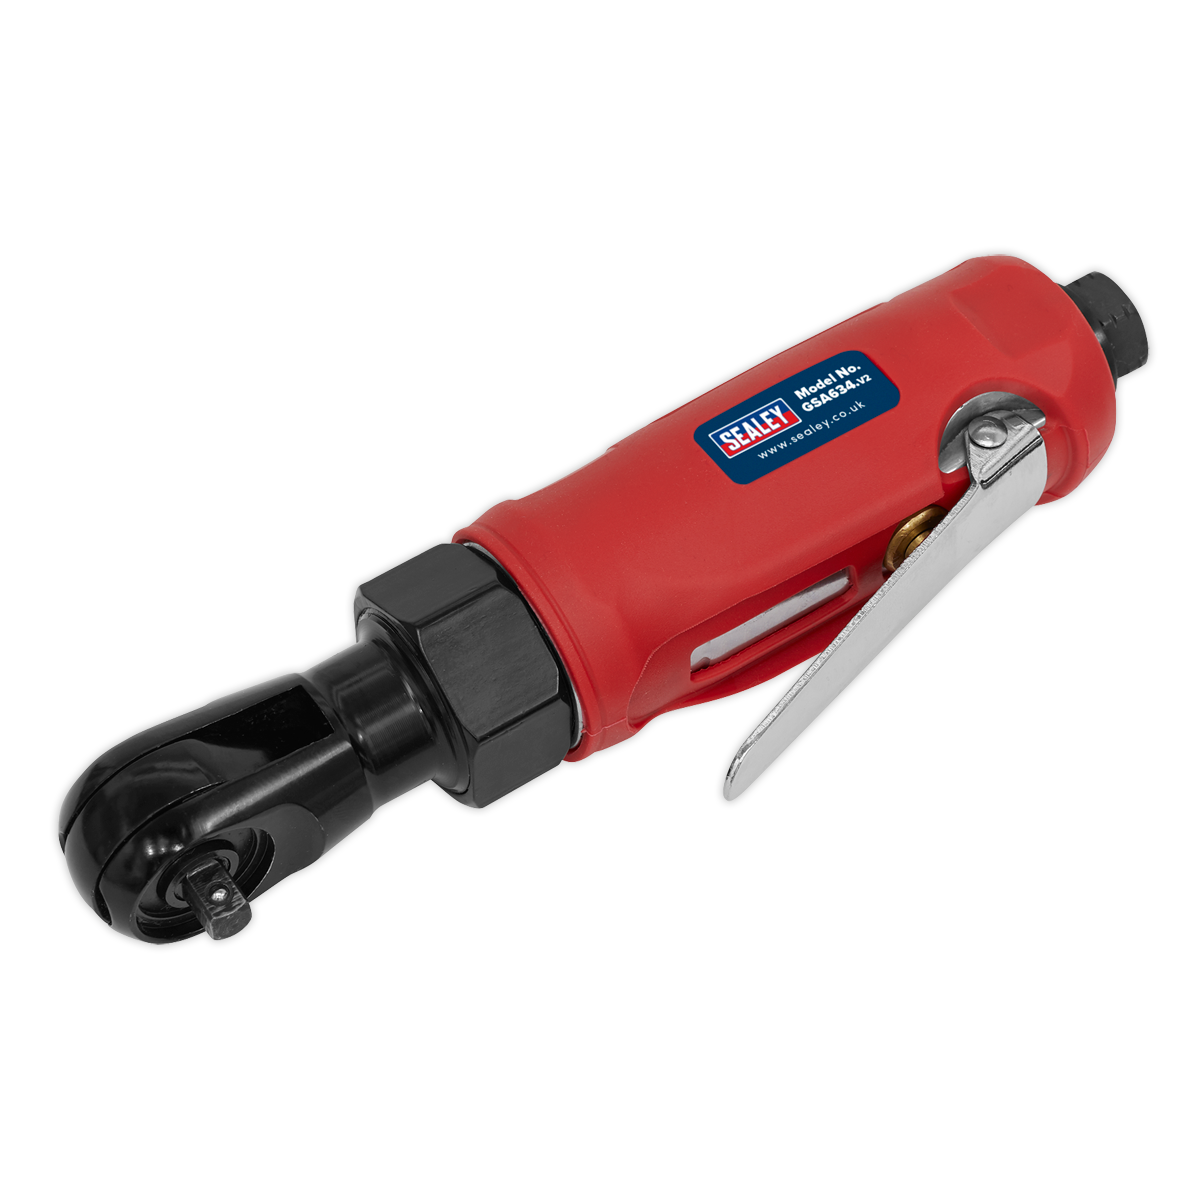 Compact Air Ratchet Wrench 1/4"Sq Drive